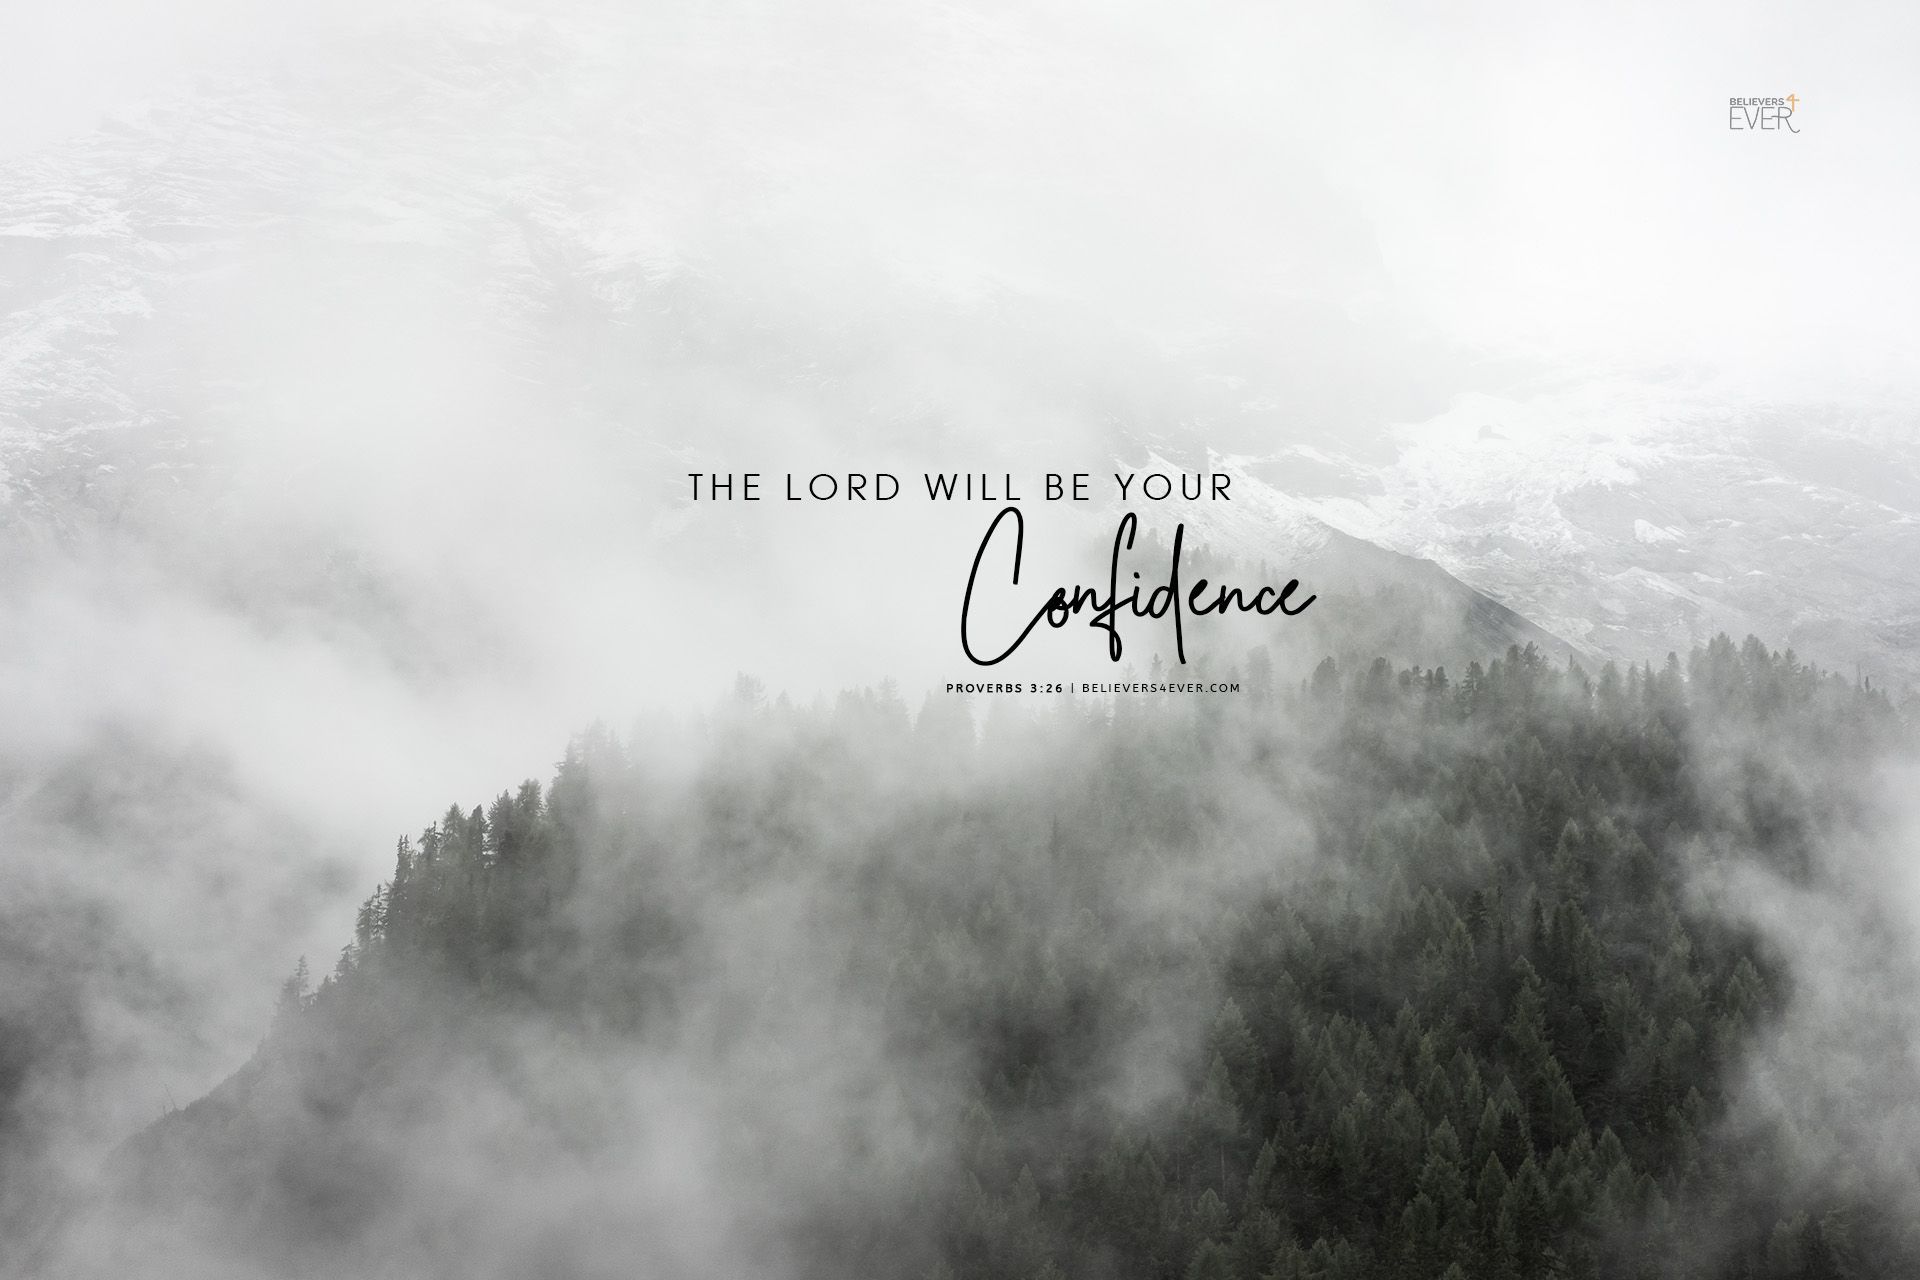 The Lord will be your confidence.com. Bible verse desktop wallpaper, Jesus wallpaper, Christian background